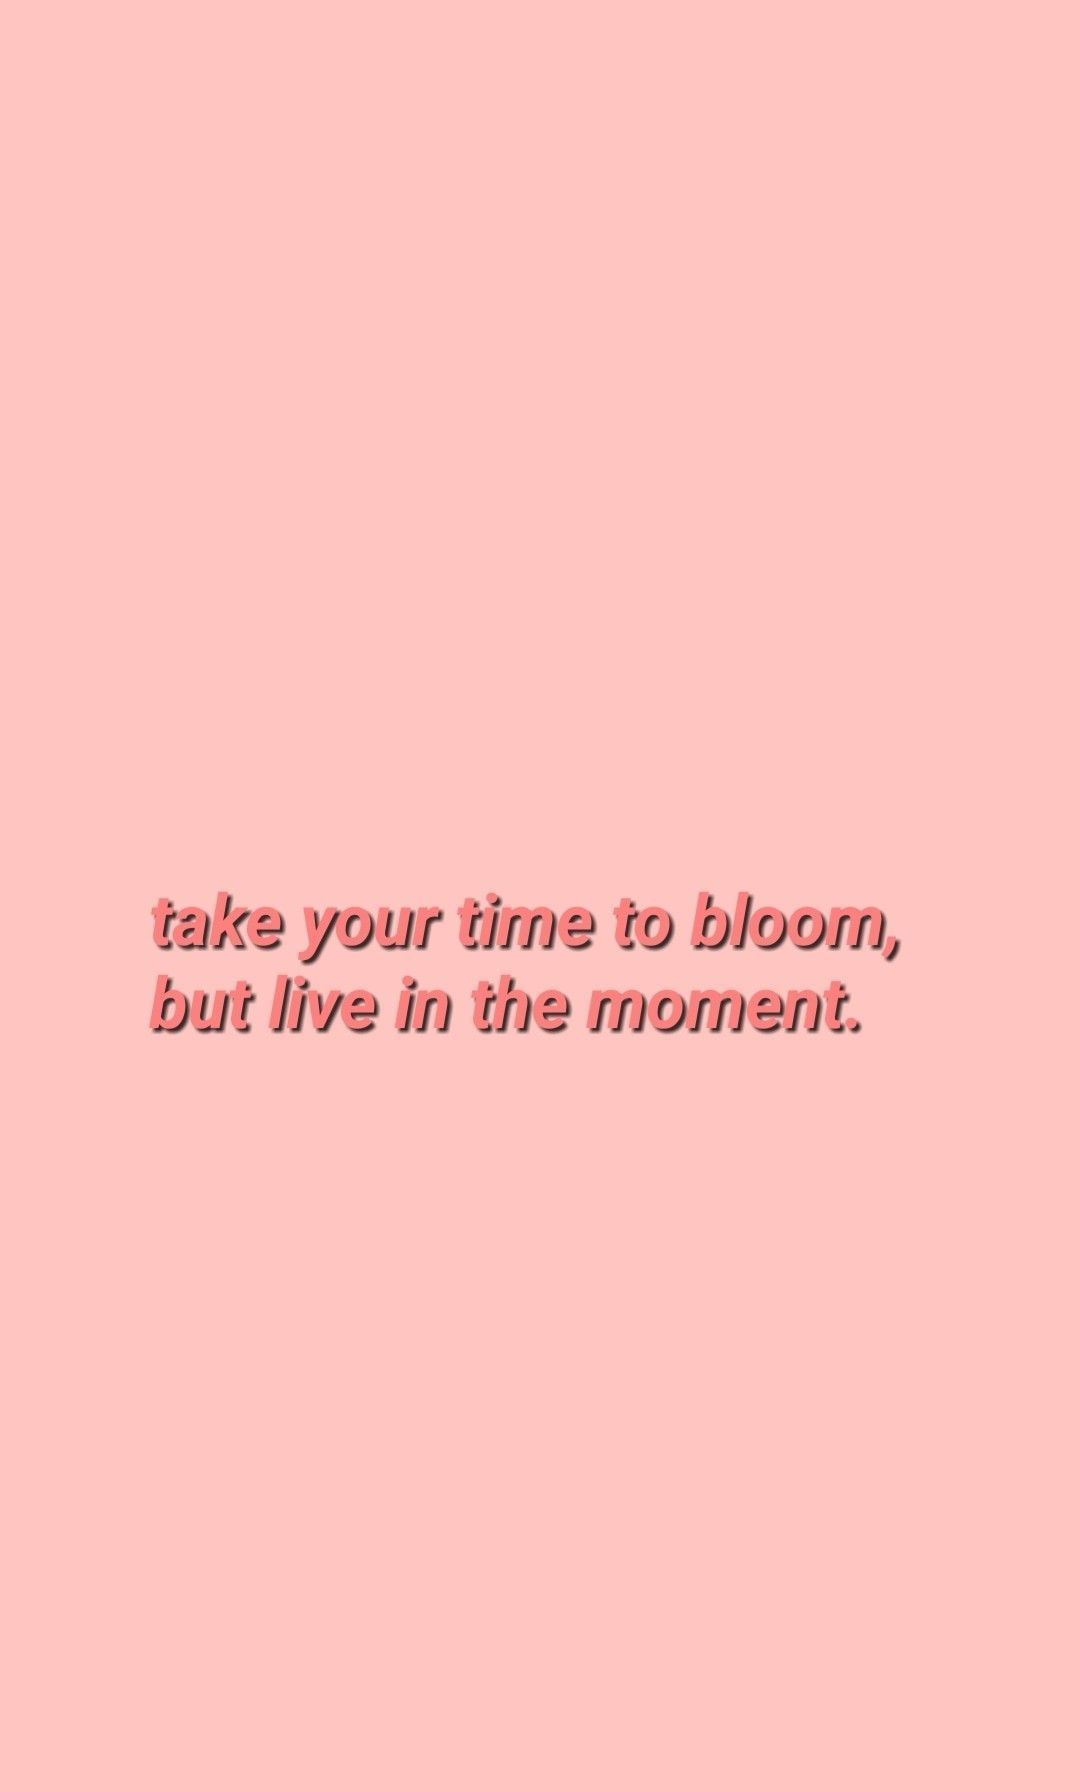 Take your time to bloom, but live in the moment. - Love